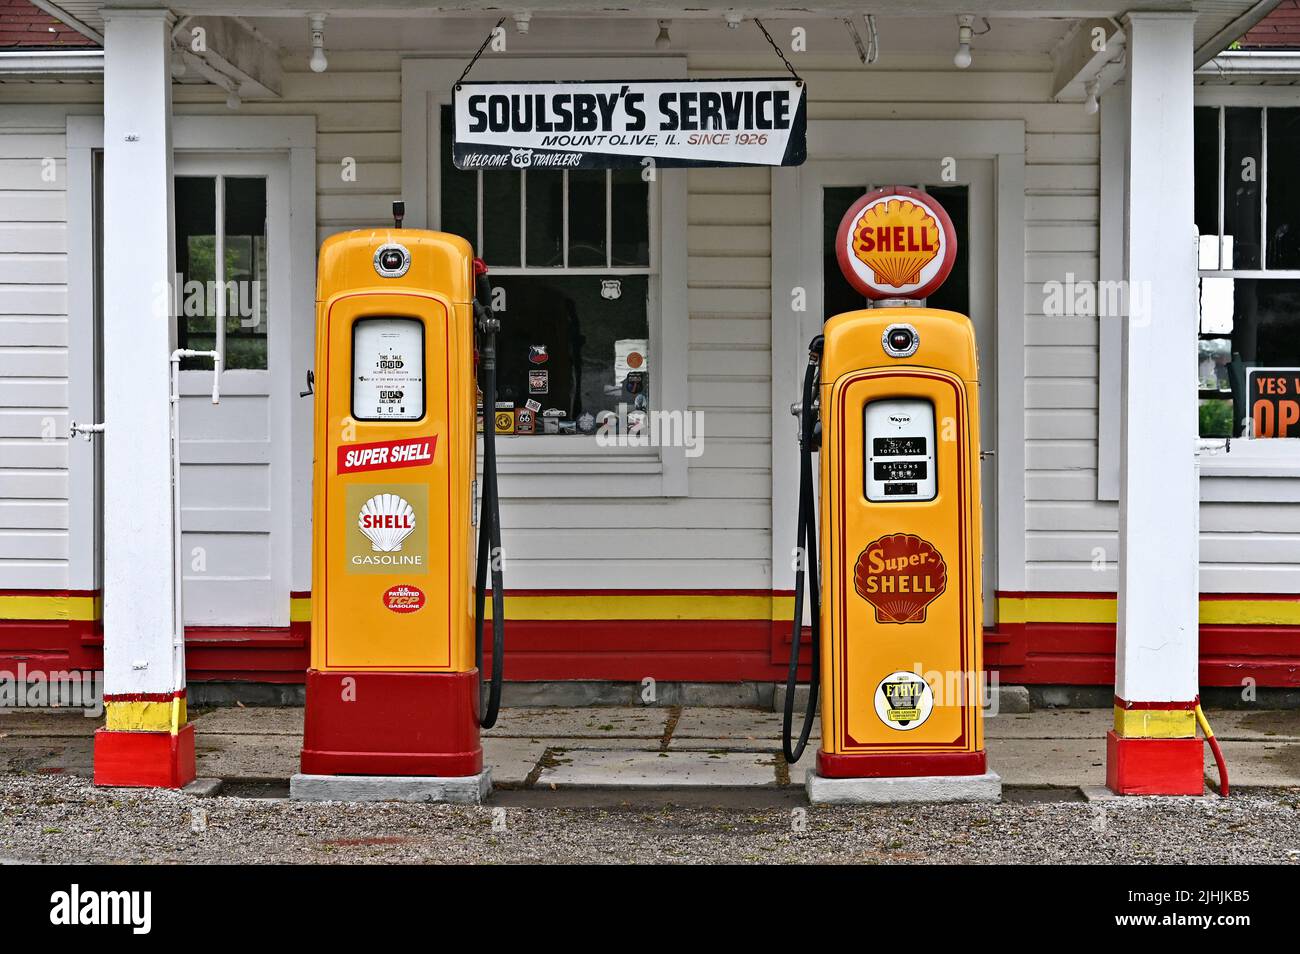 Soulsby Shell Gas Station of 1926, Mt. Olive, Illinois, United States of America Stock Photo